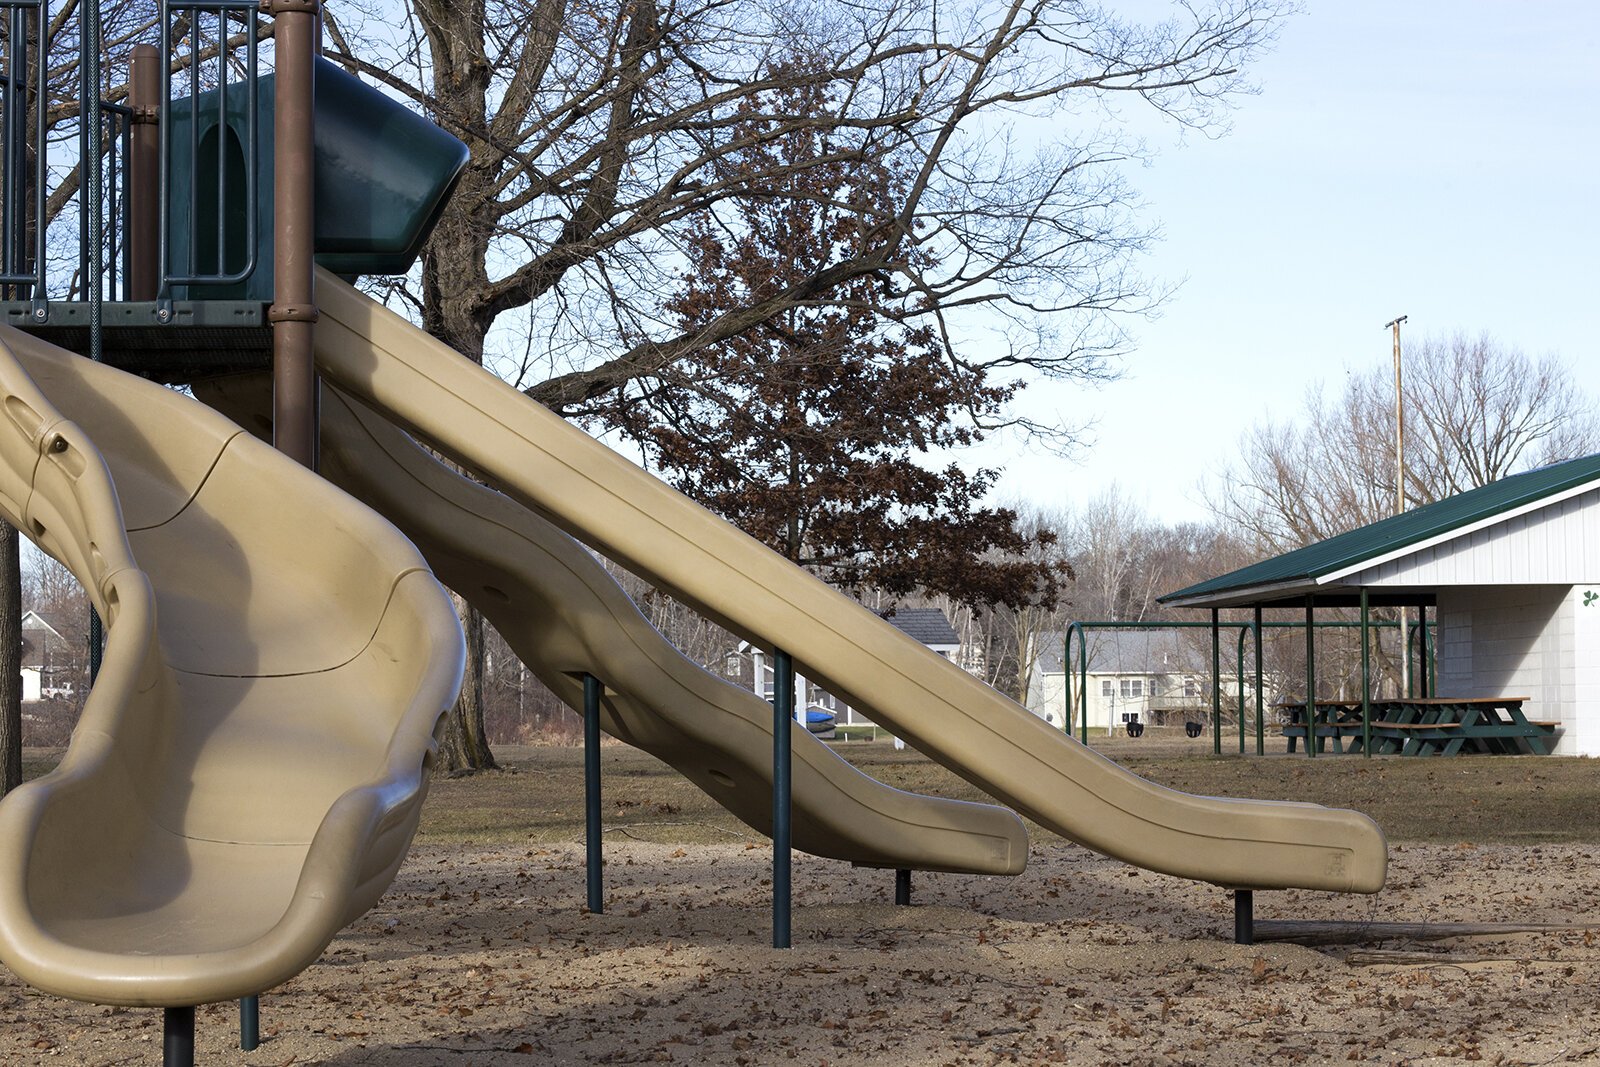 A new assessment conducted by the Gratiot-Isabella Regional Education Service District considered physical activity assets in Clare, such as this playscape at Shamrock Park.